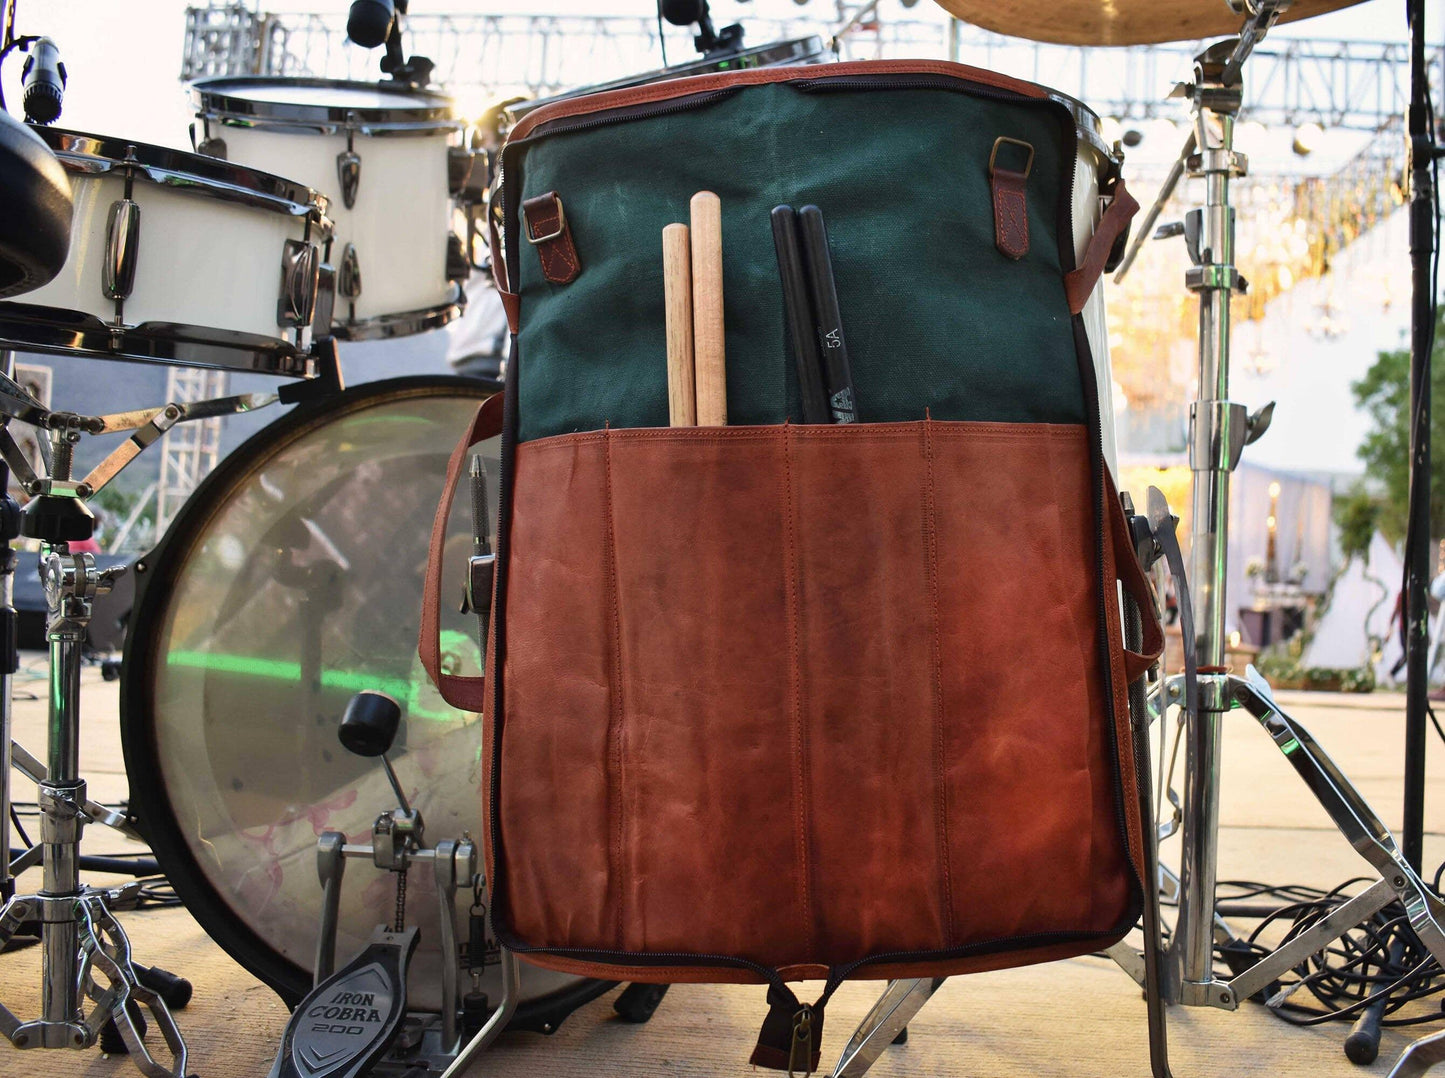 The Bruford Drumsticks Bag - The Tool Store